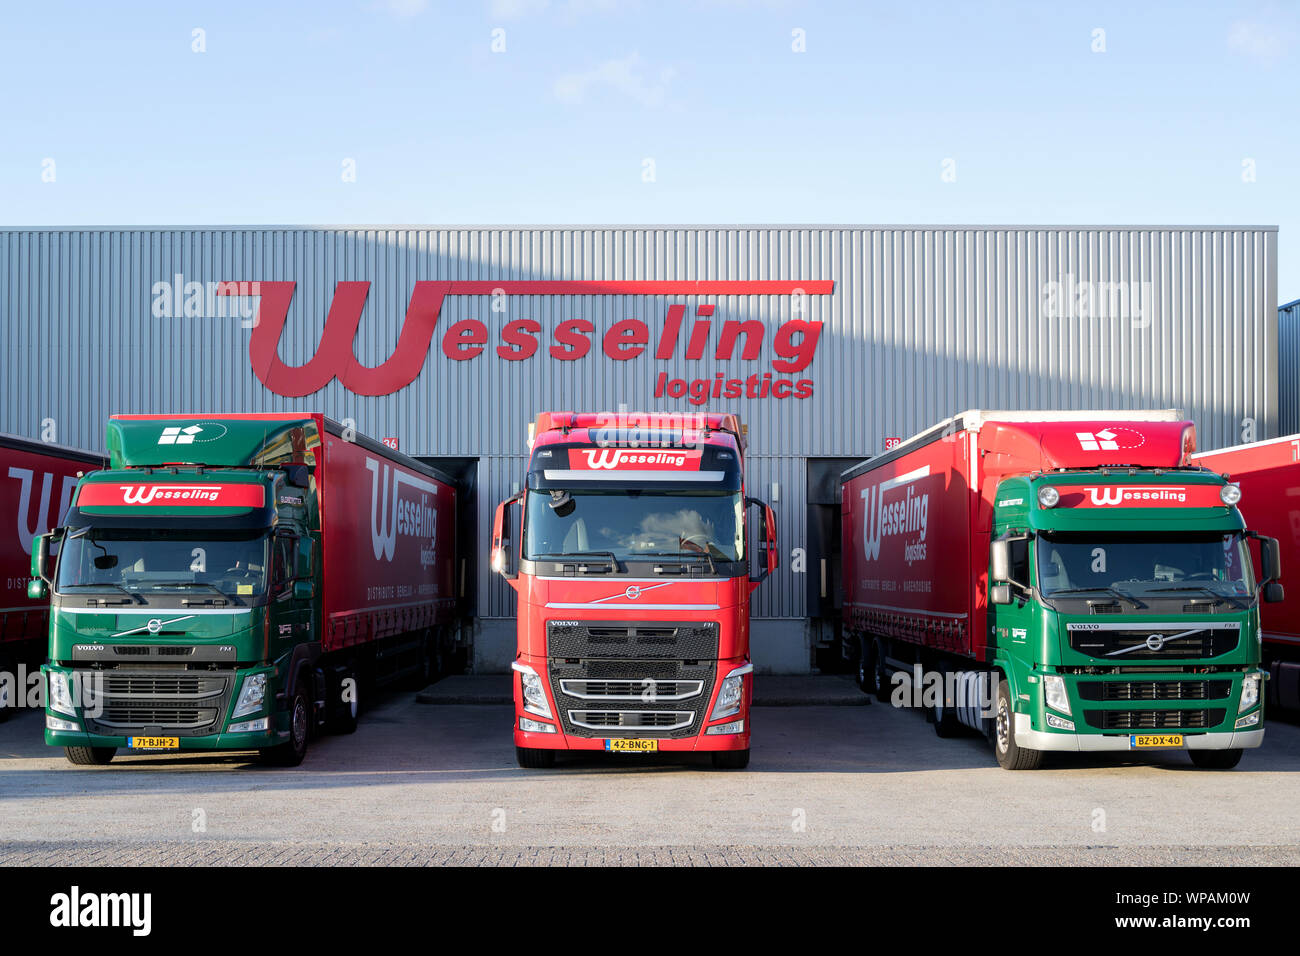 Wesseling trucks at warehouse. Wesseling Ligistics is a medium-sized family business with more than 100 years of experience. Stock Photo